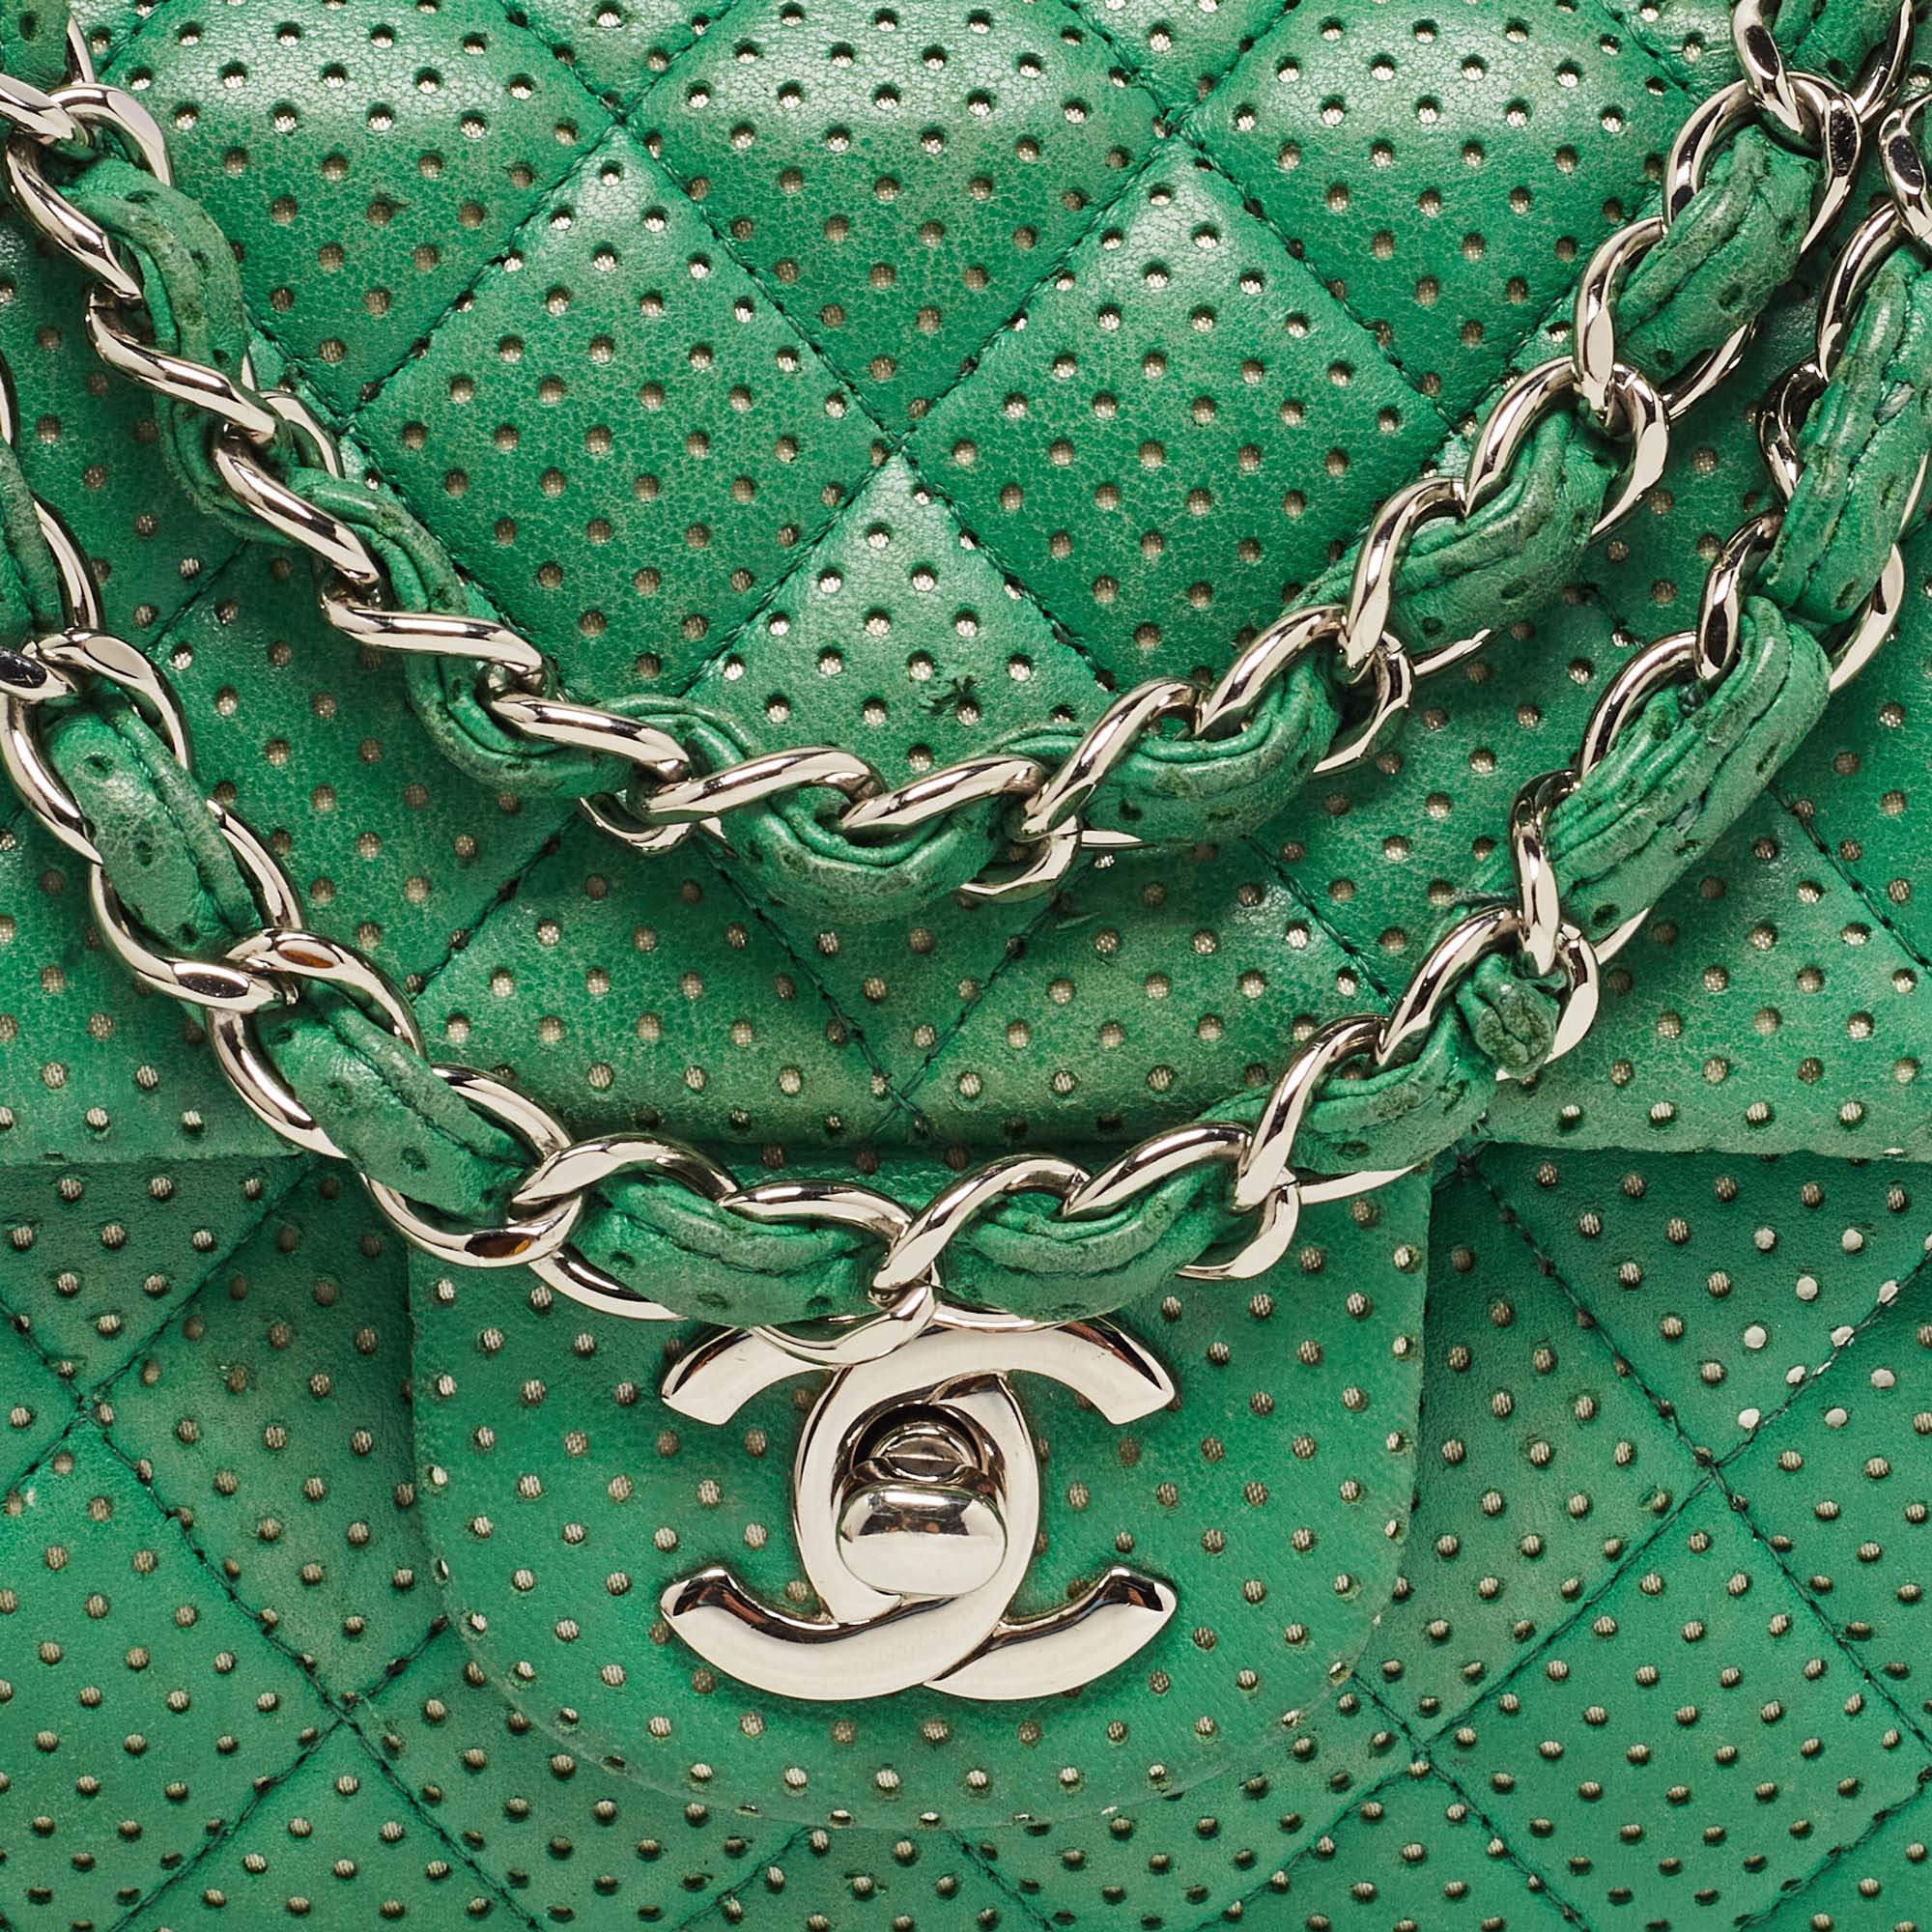 Chanel Green Quilted Perforated Leather East/West Classic Flap Bag